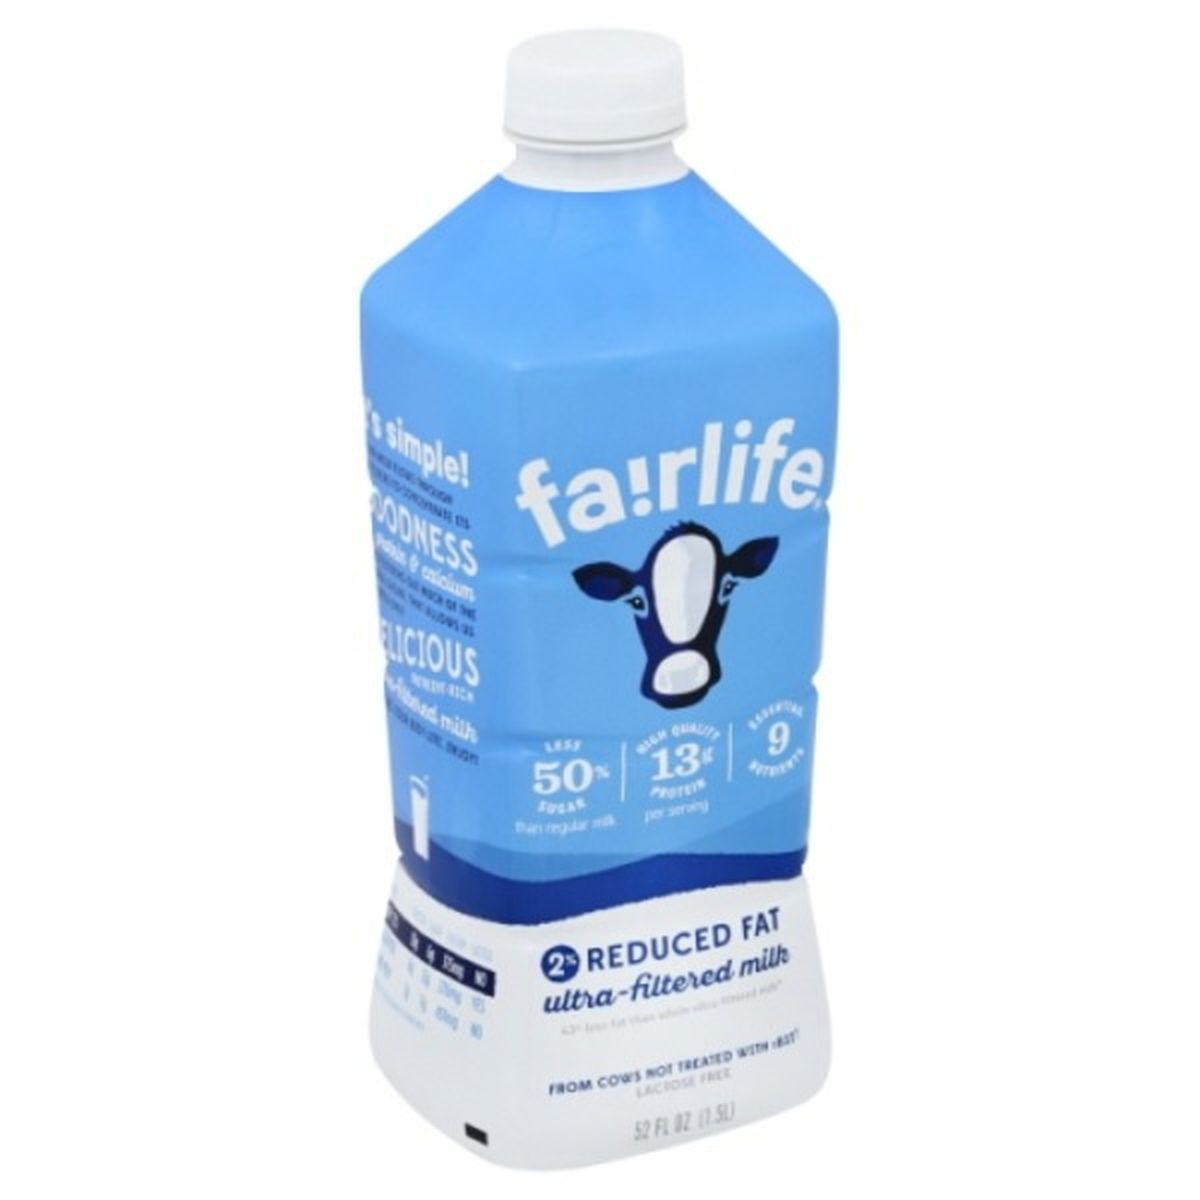 Calories in fairlife Milk, Ultra-Filtered, 2% Reduced Fat